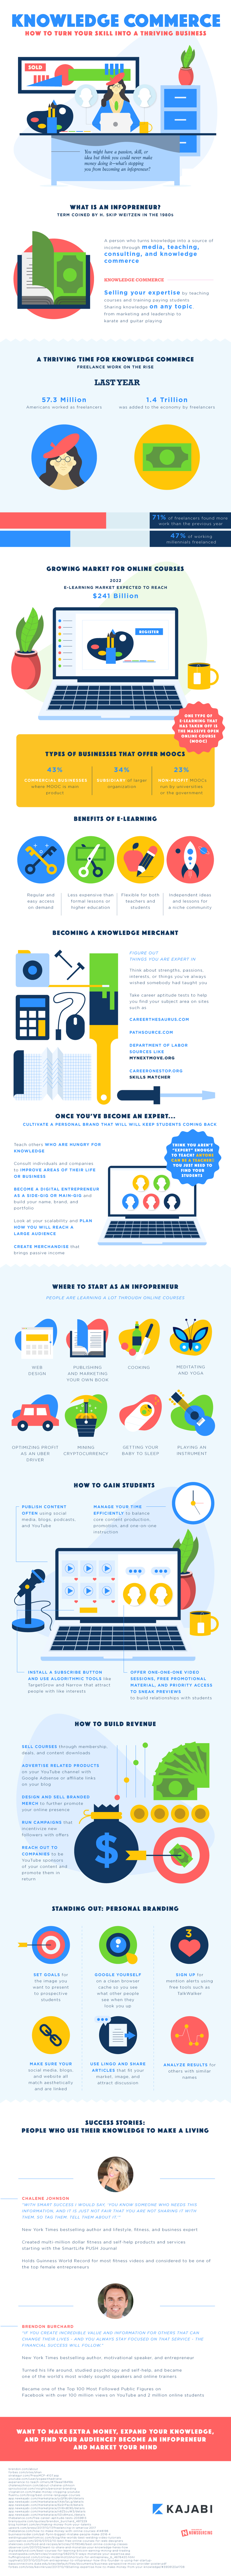 Infopreneurship: How to Convert Your Knowledge Skills into a Successful Business - Infographic